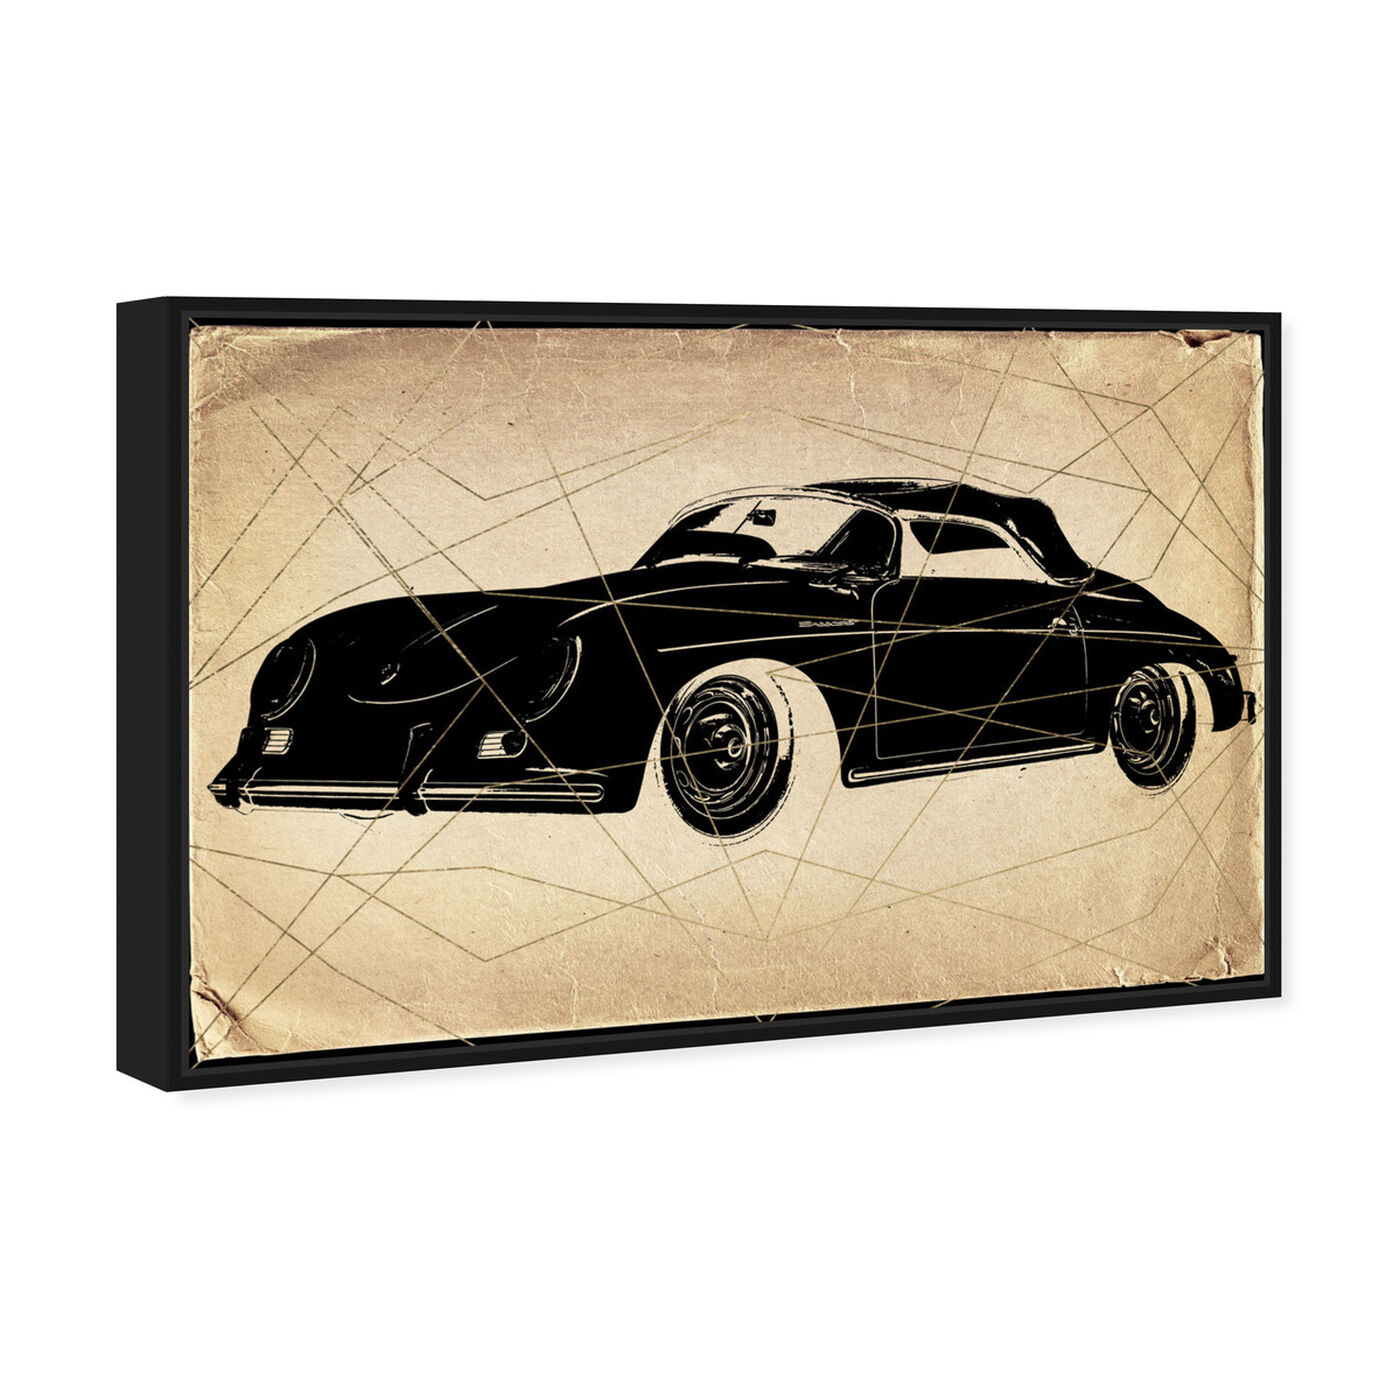 Angled view of Porsche Print featuring transportation and automobiles art.